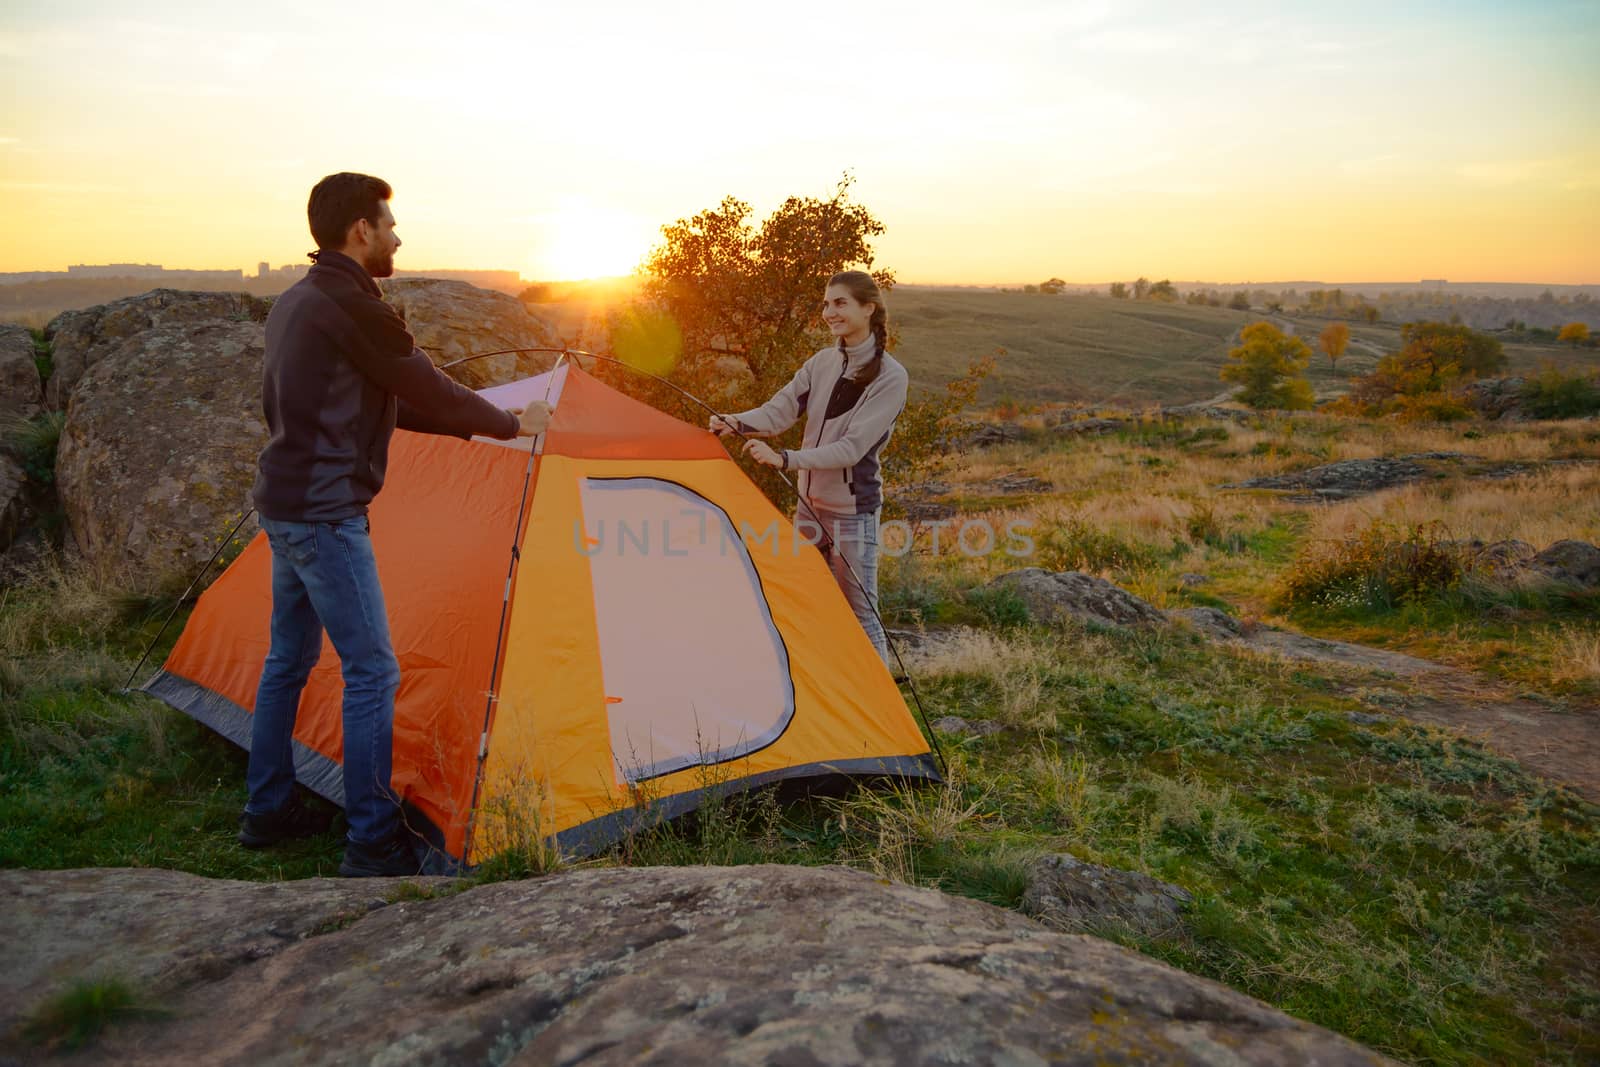 Young Couple Assembling the Tent at Sunset in the Mountains. Adventure and Family Travel. by maxpro